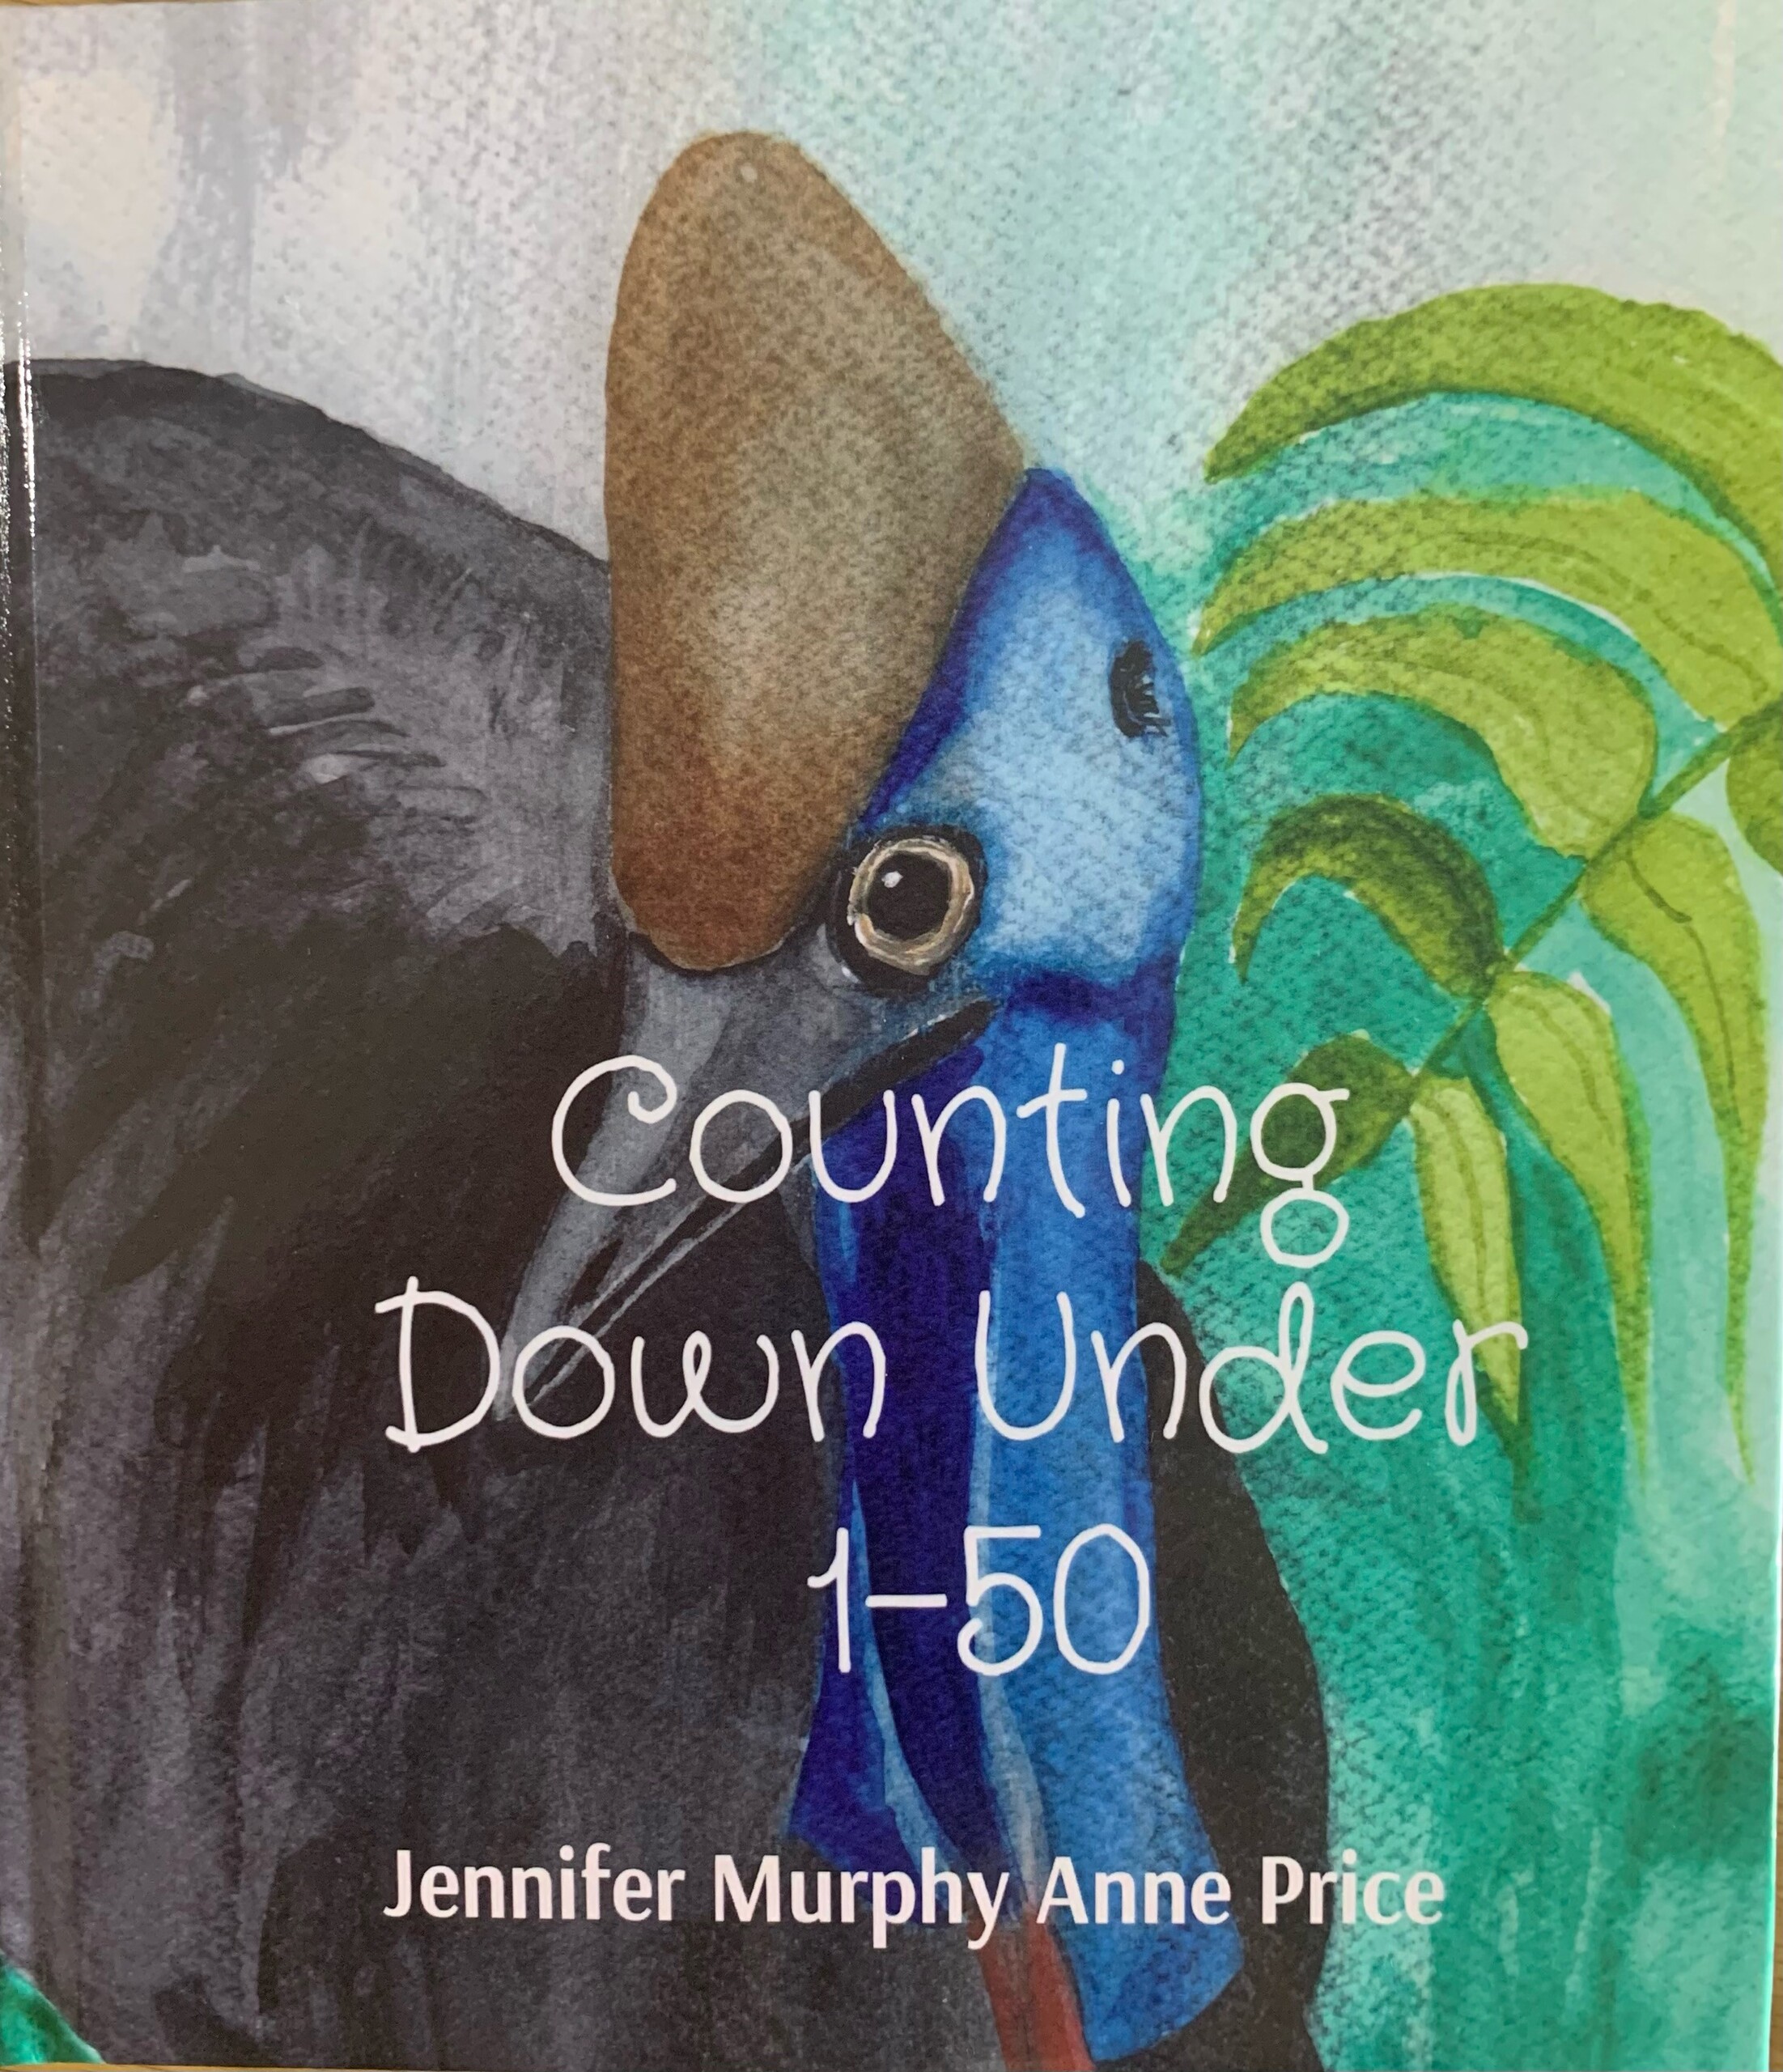 Counting Down Under 1 to 50 hard front cover